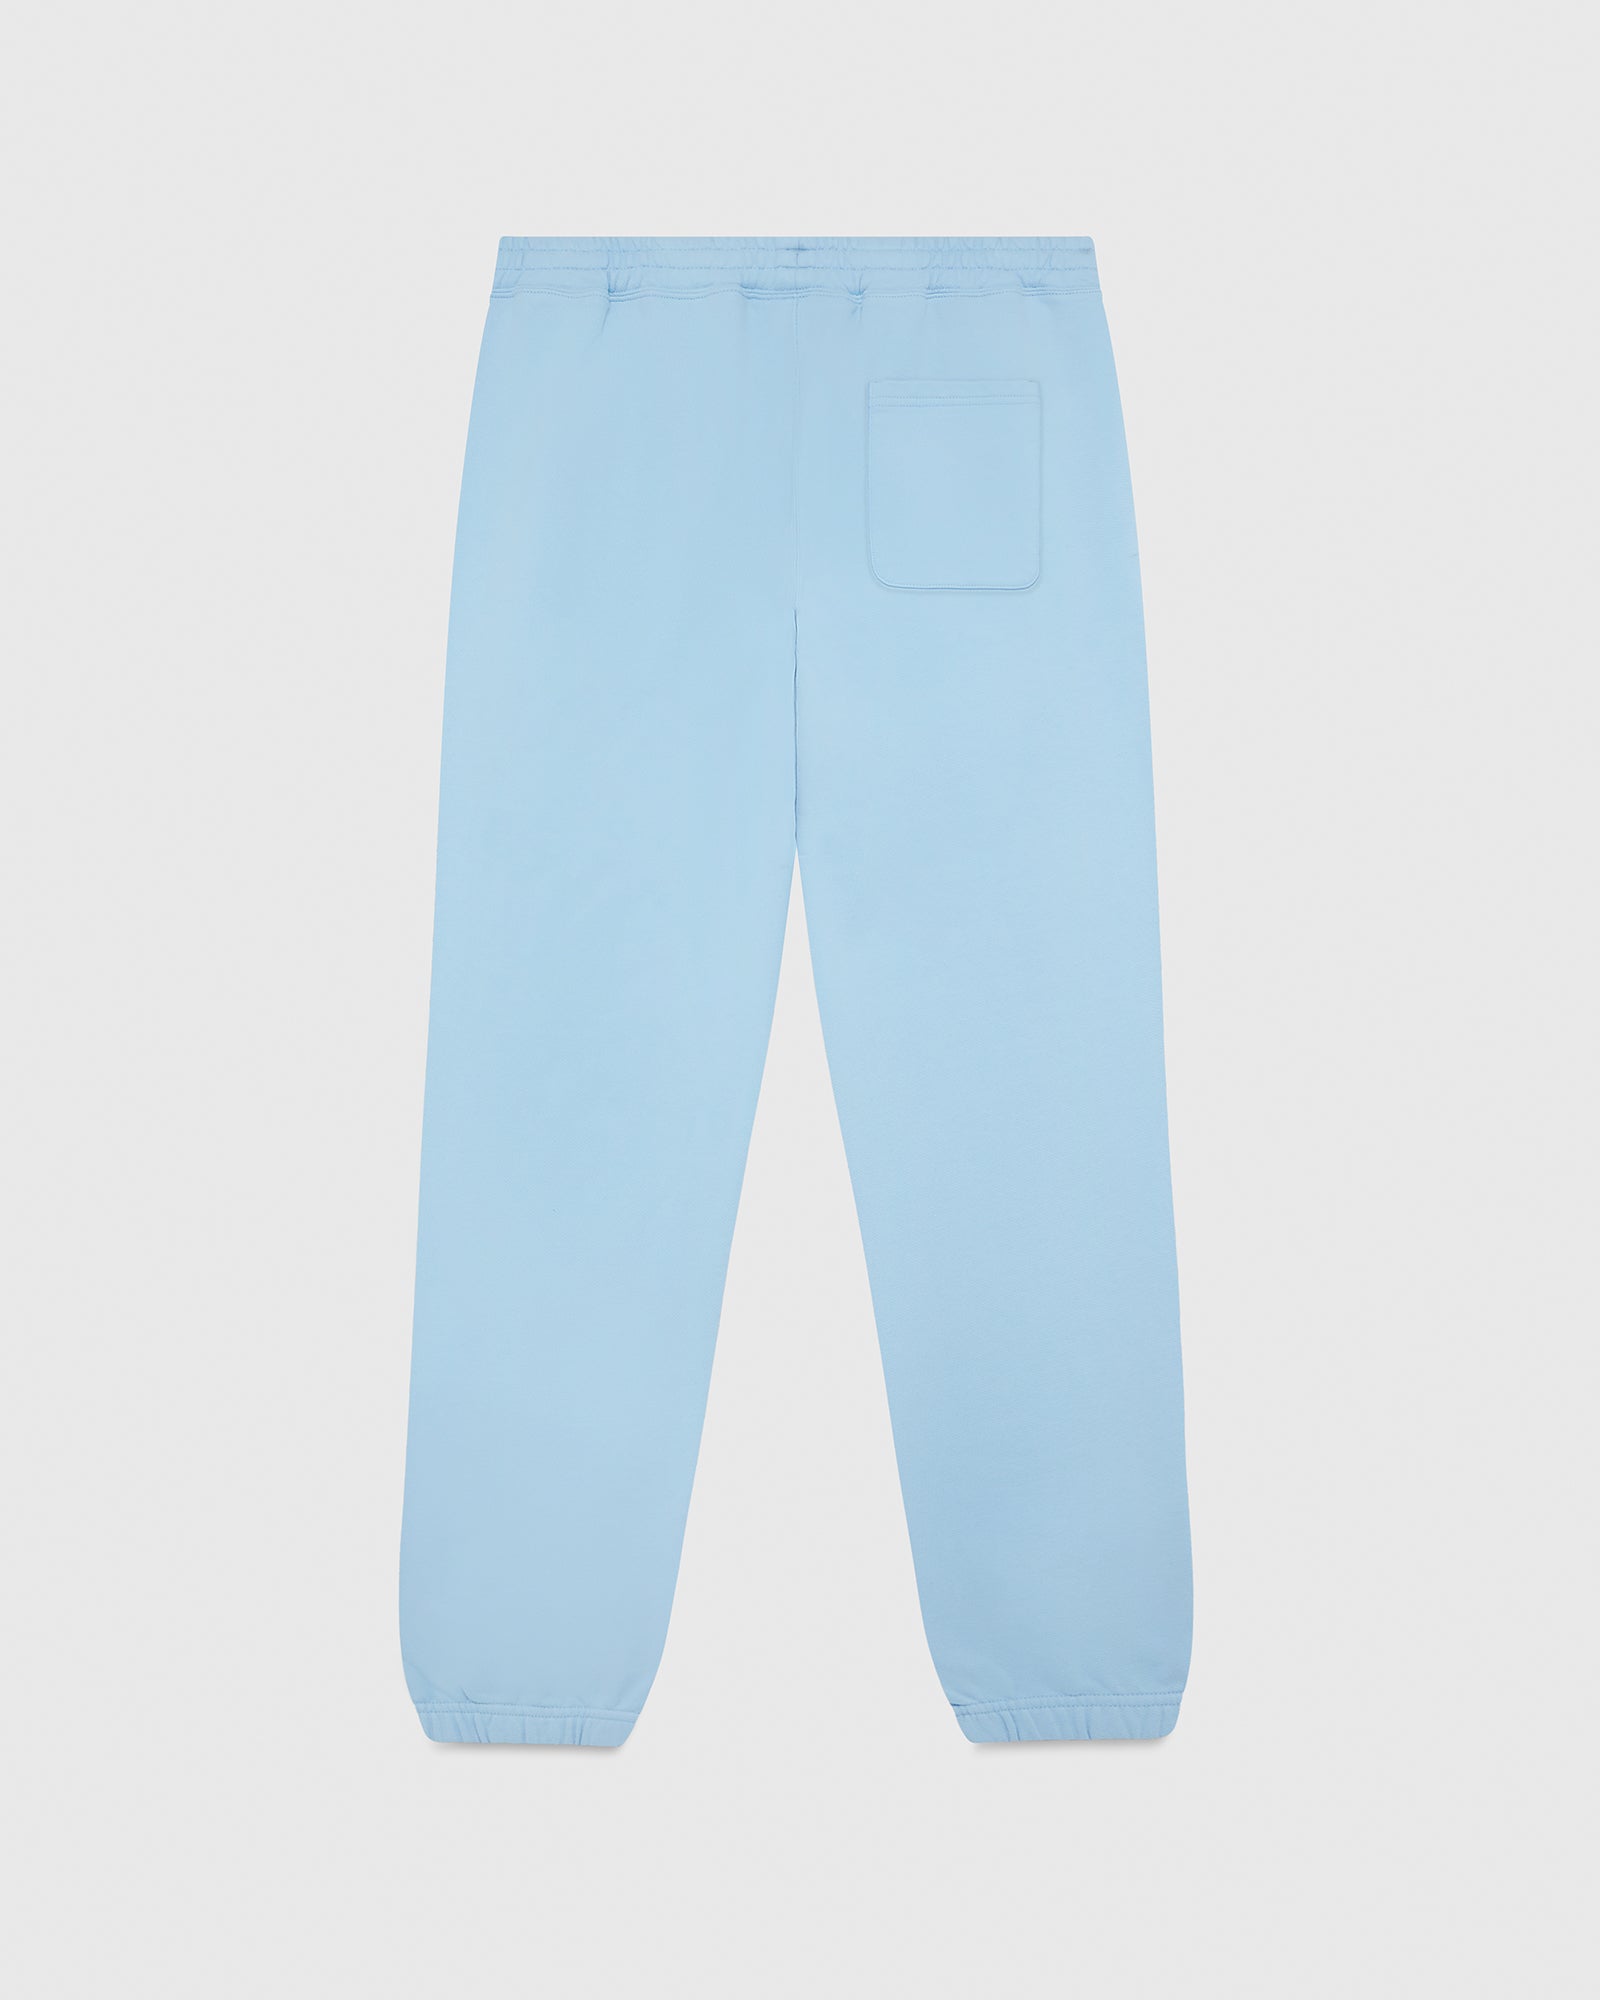 Classic Relaxed Fit Sweatpant - Light Blue - October's Very Own